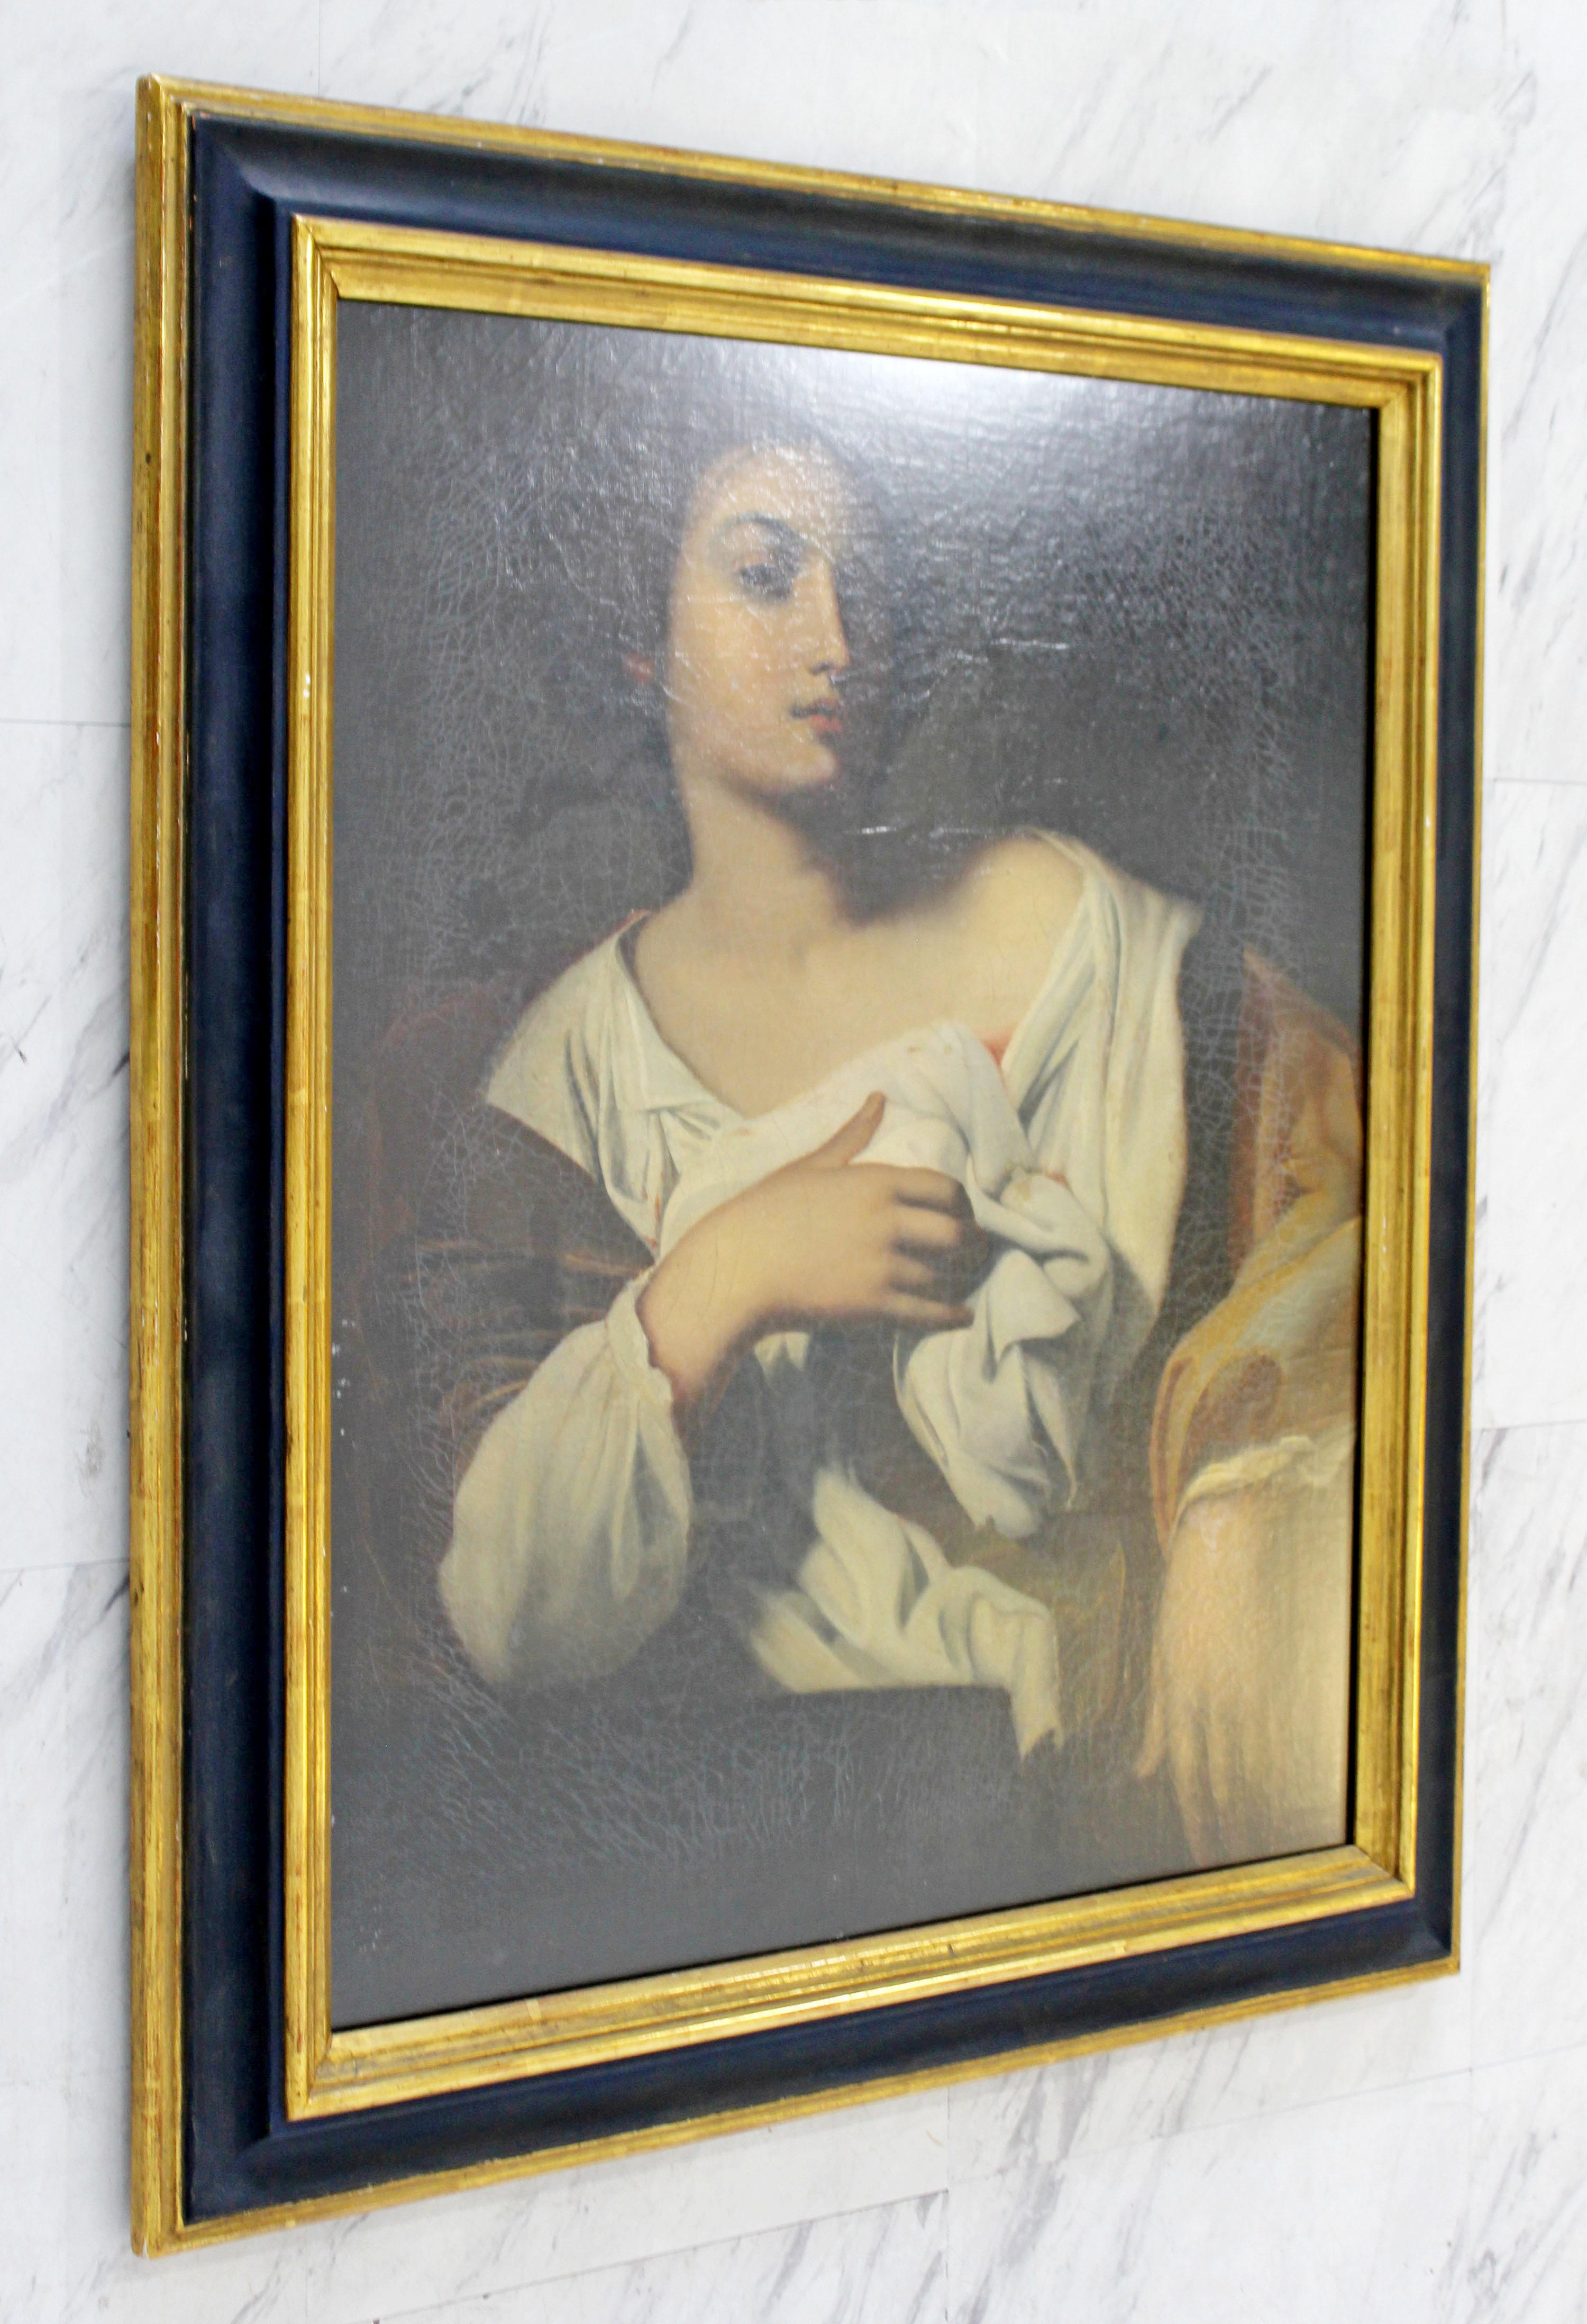 For your consideration is an incredible, antique, framed oil painting of St. Agnes the Martyr, by an unknown artist, circa the 14th or 15th century. In good condition. The dimensions of the frame are 26